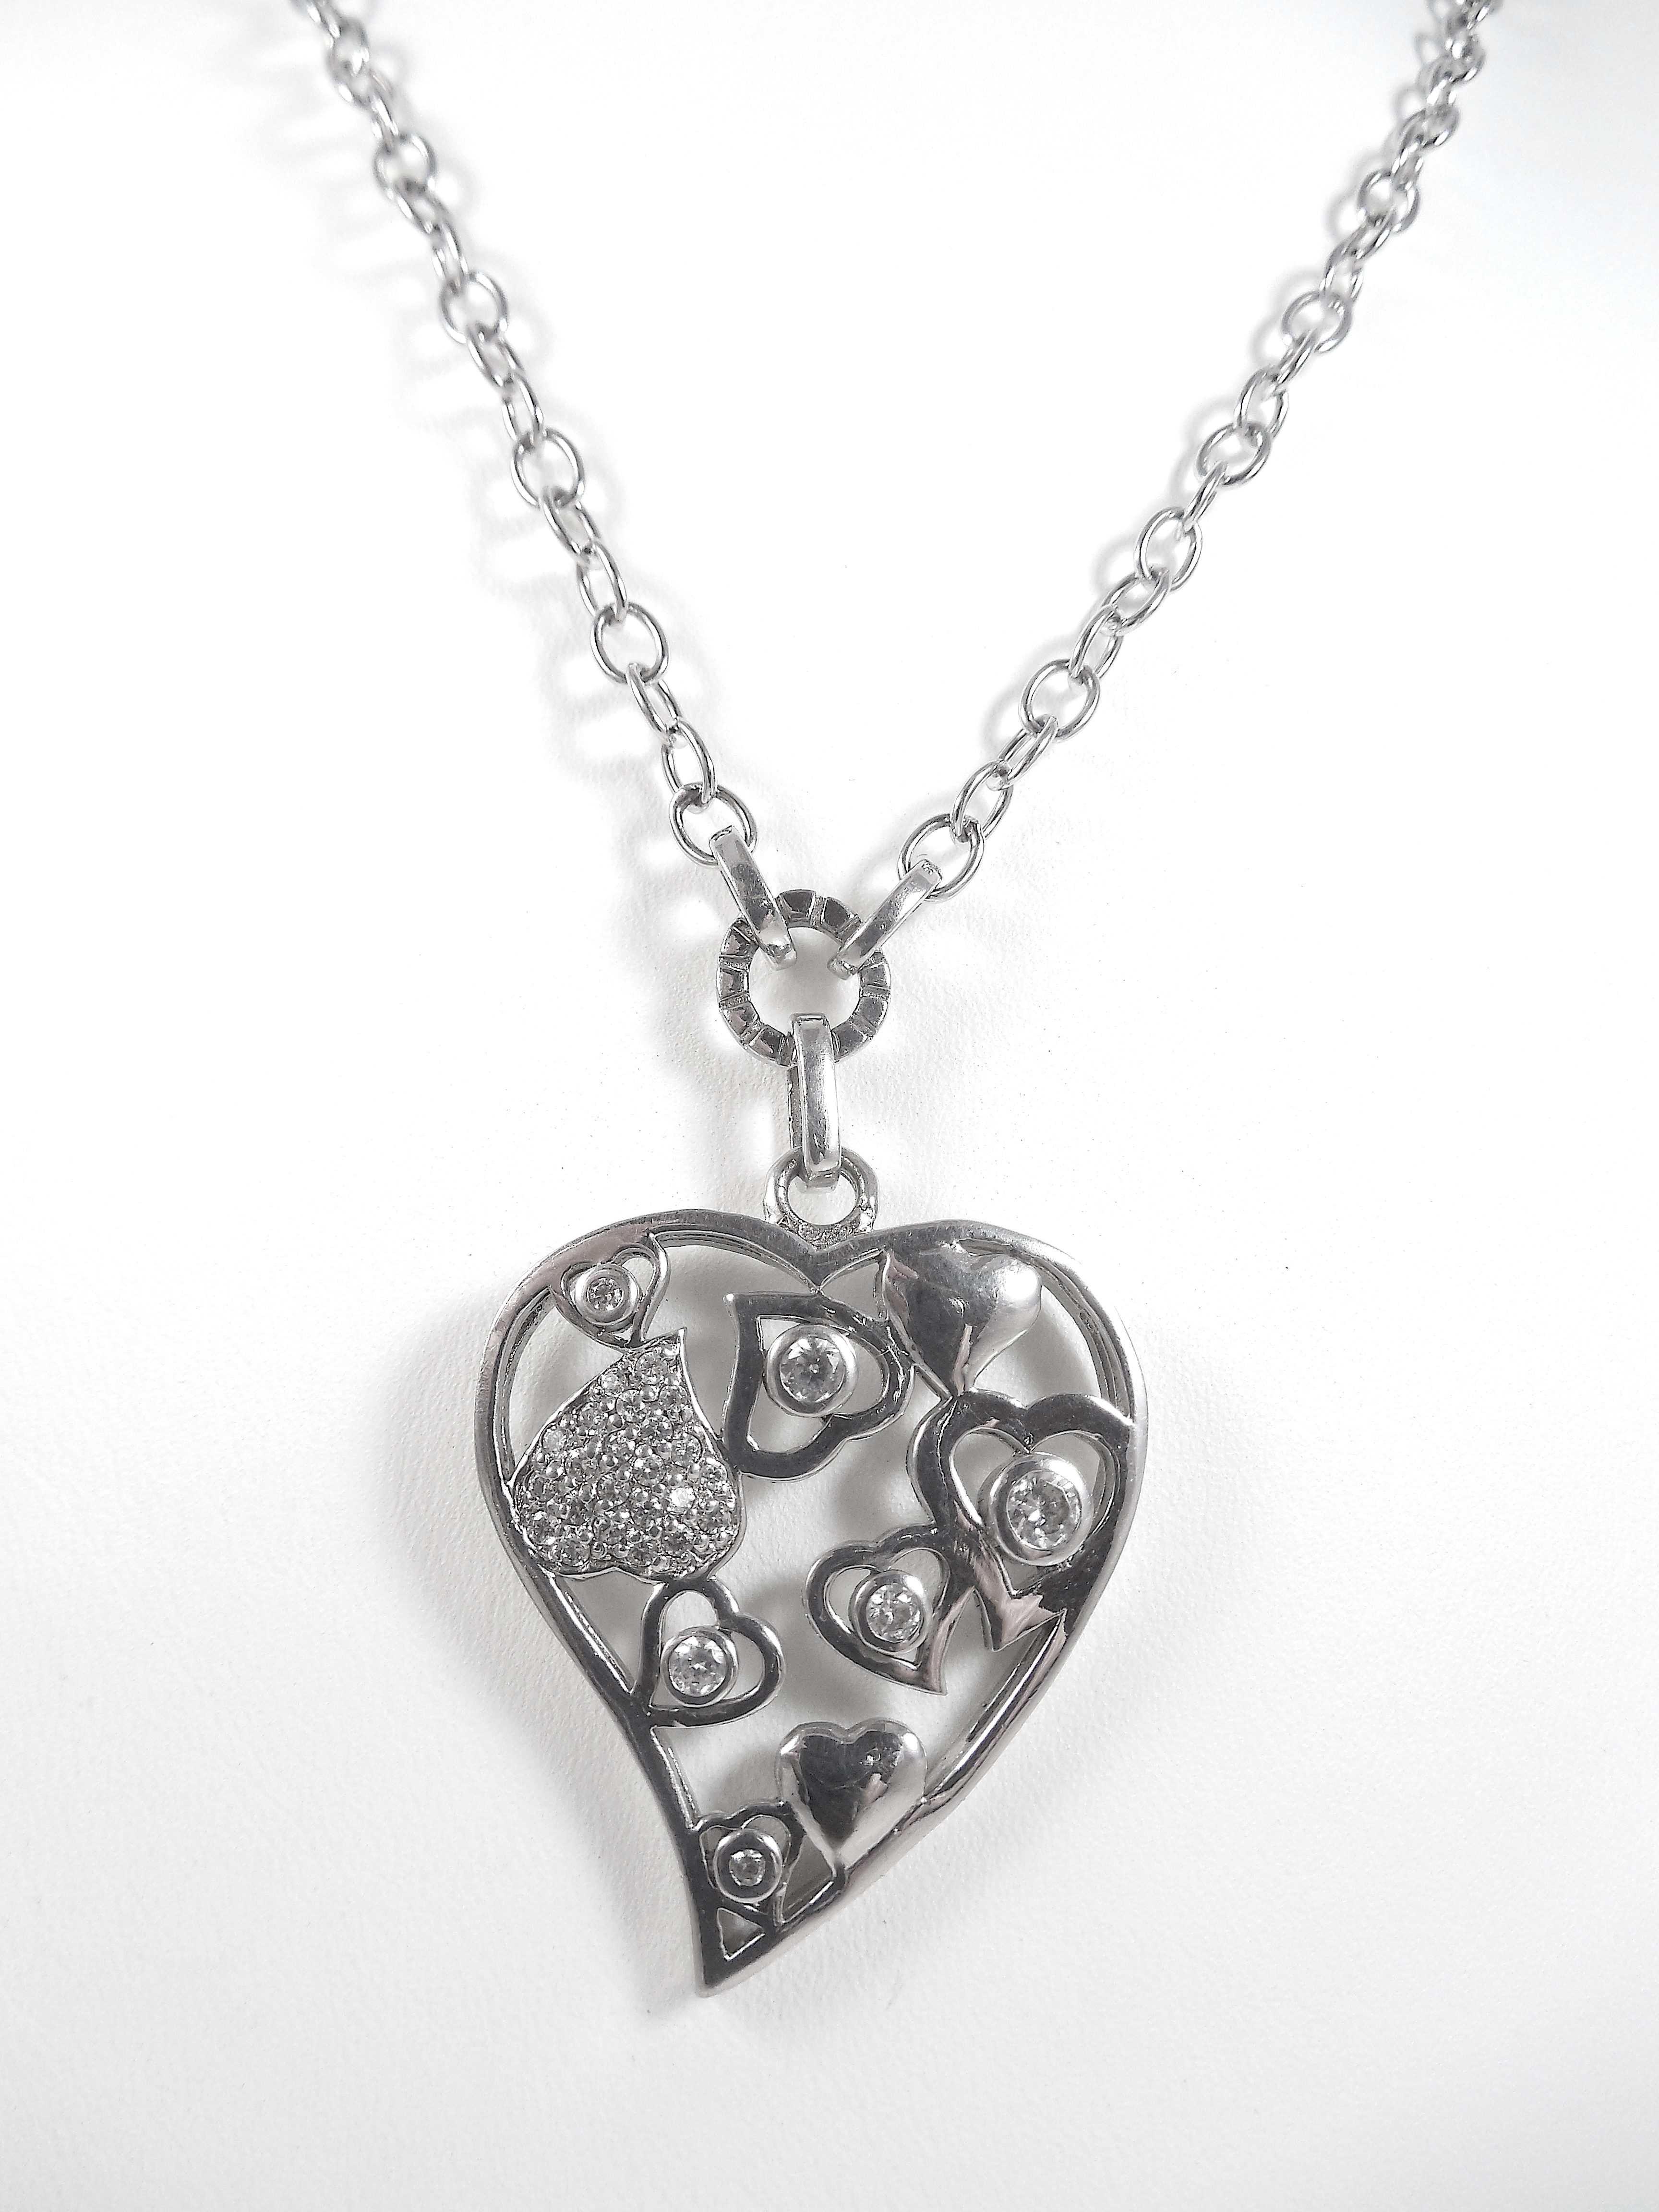 Heart shaped silver neklace - Image 4 of 4